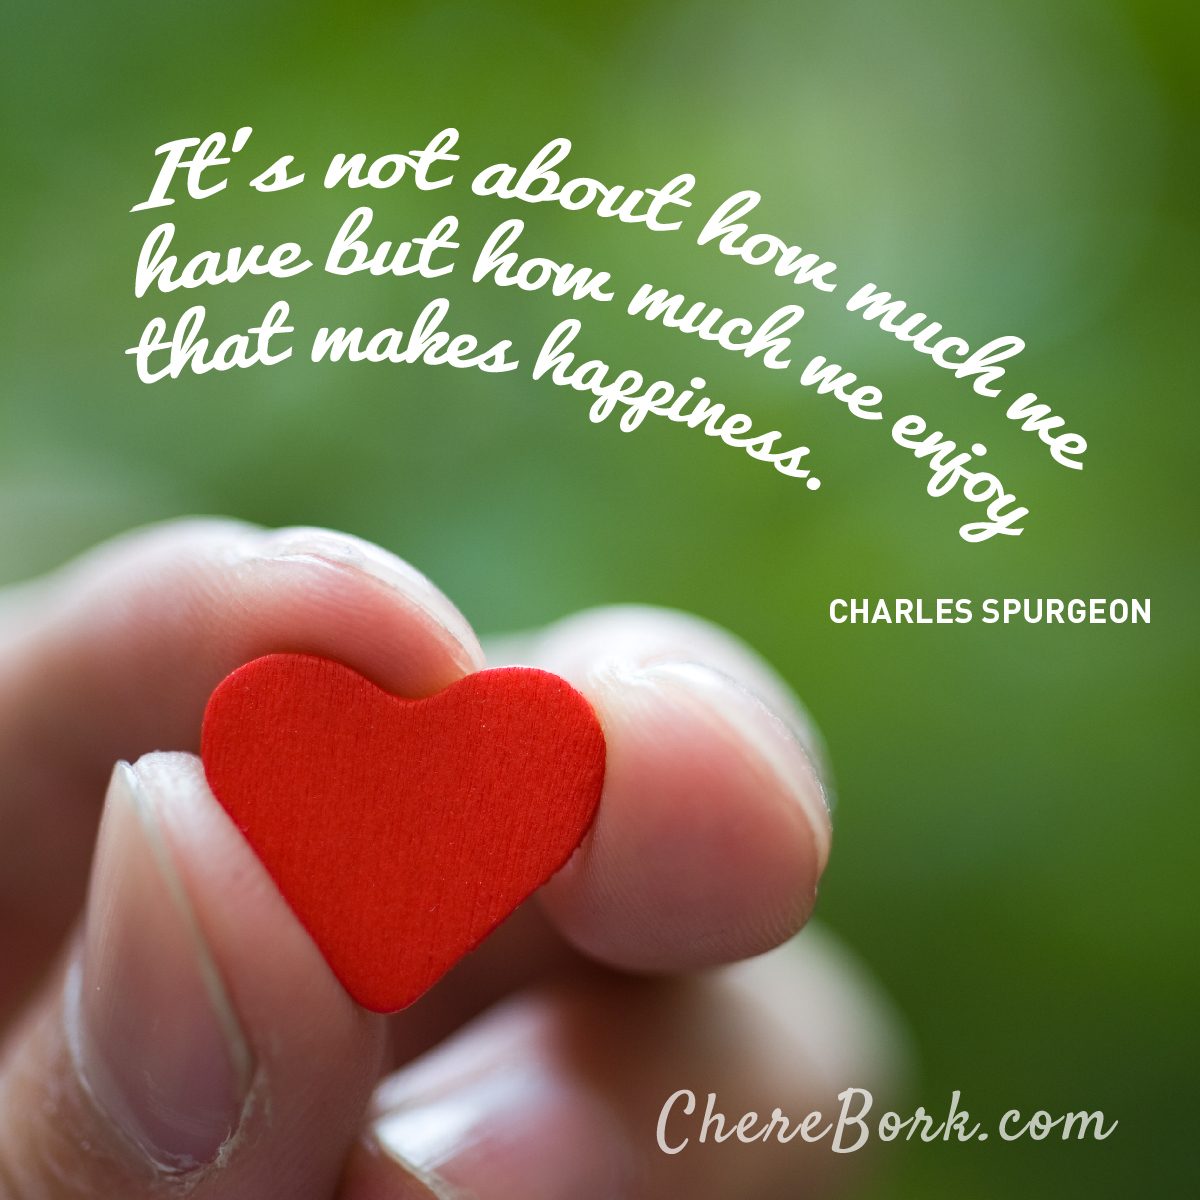 It's not about how much we have but how much we enjoy that makes happiness. -Charles Spurgeon